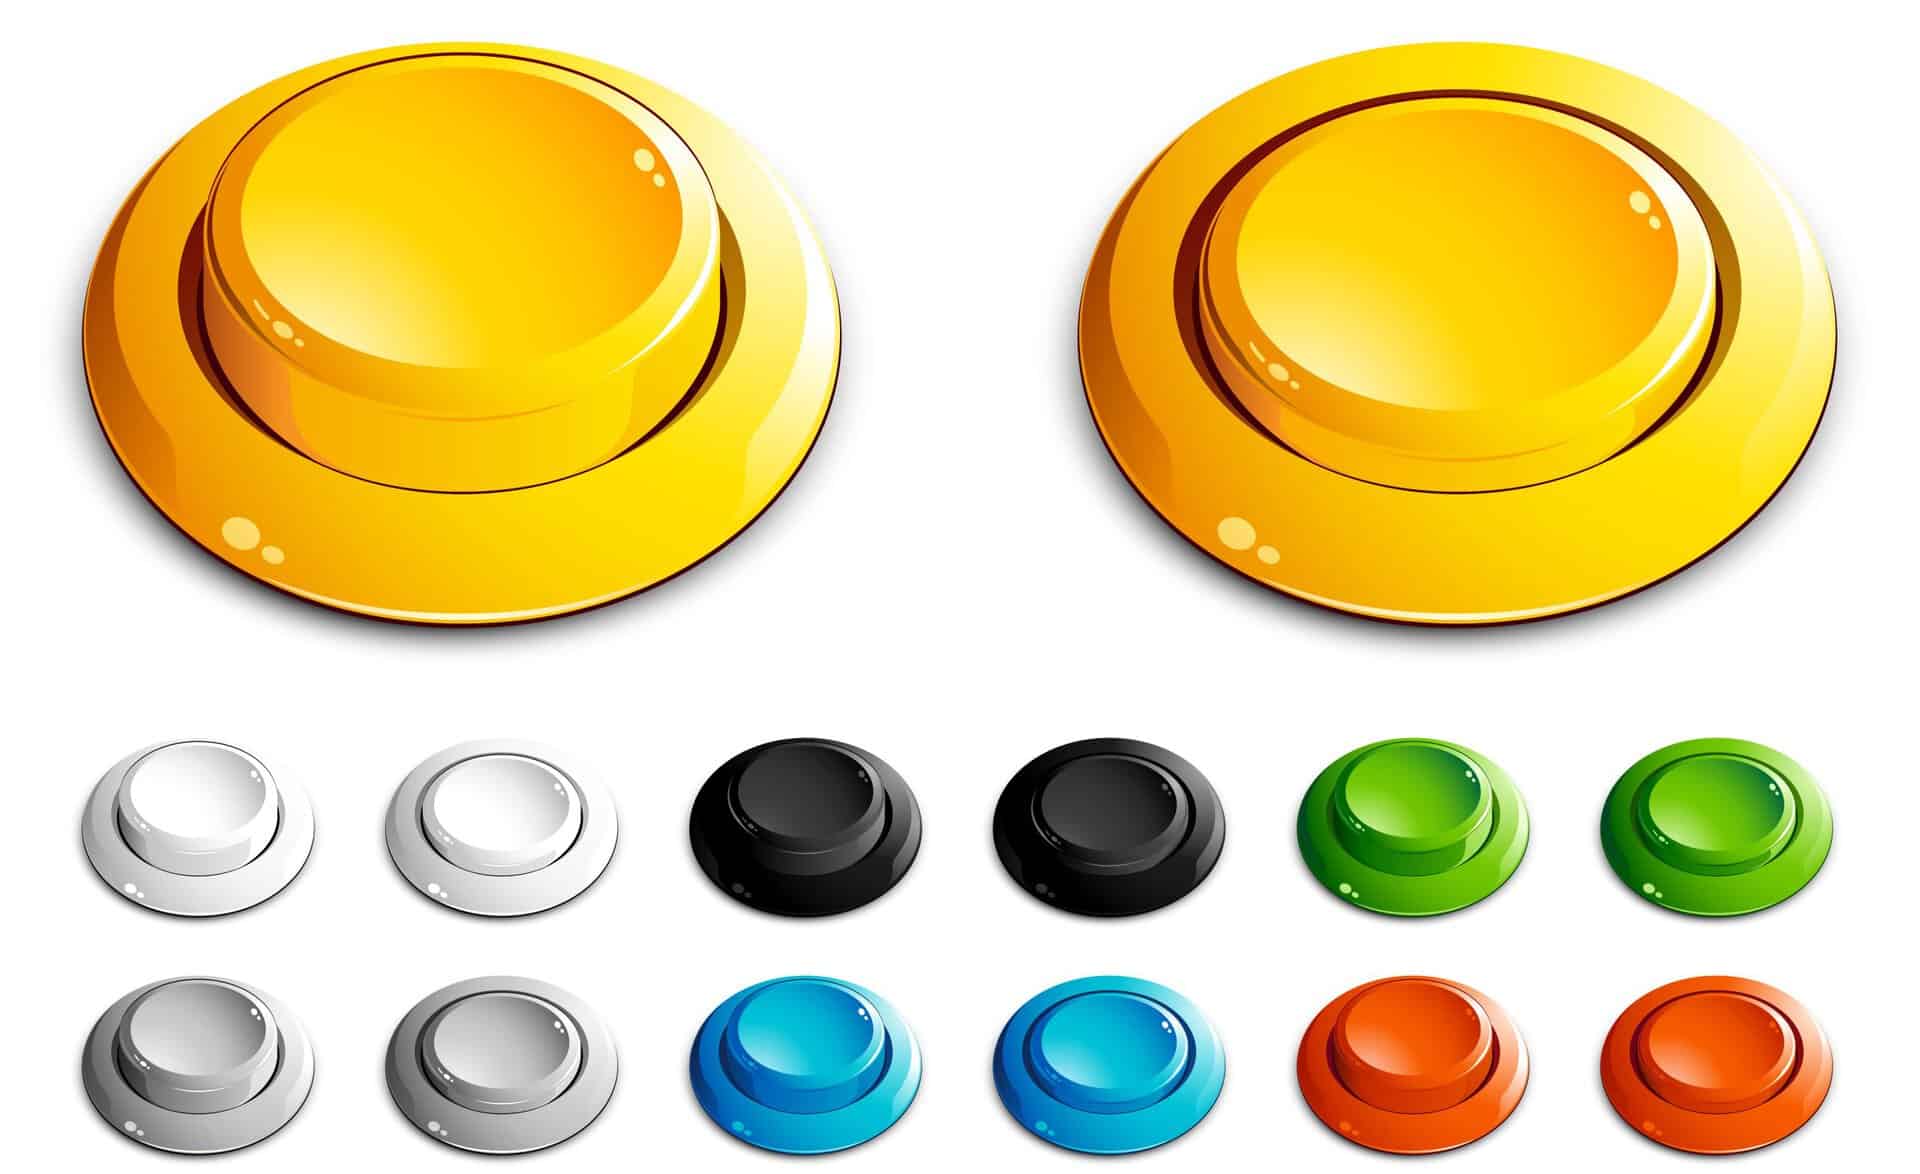 Stock image showcasing an array of concave arcade cabinet buttons in different colors and states. The image includes two large, shiny yellow buttons, one depicted in an unpressed state and the other pressed down. Below them, there are smaller buttons in two rows featuring colors such as silver, black, green, blue, and orange. Some of the smaller buttons appear in a raised position indicating they are unpressed, while others are depicted in a pressed position, showing their functionality within an arcade gaming context